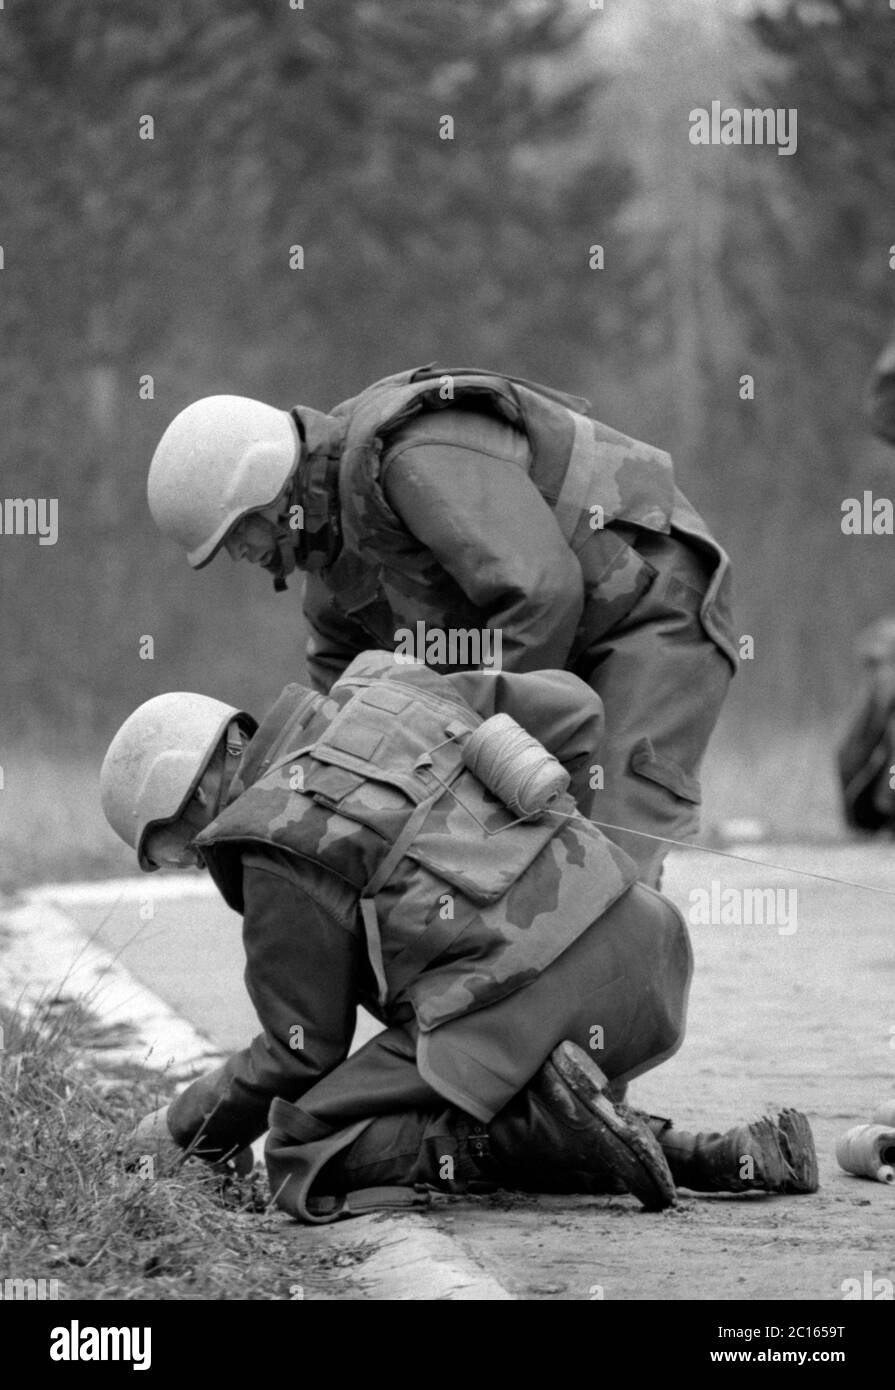 8th March 1994 During the war in Bosnia: French UNPROFOR soldiers clear mines at Tuzla Airport to allow aid flights to commence in a few days time. Stock Photo